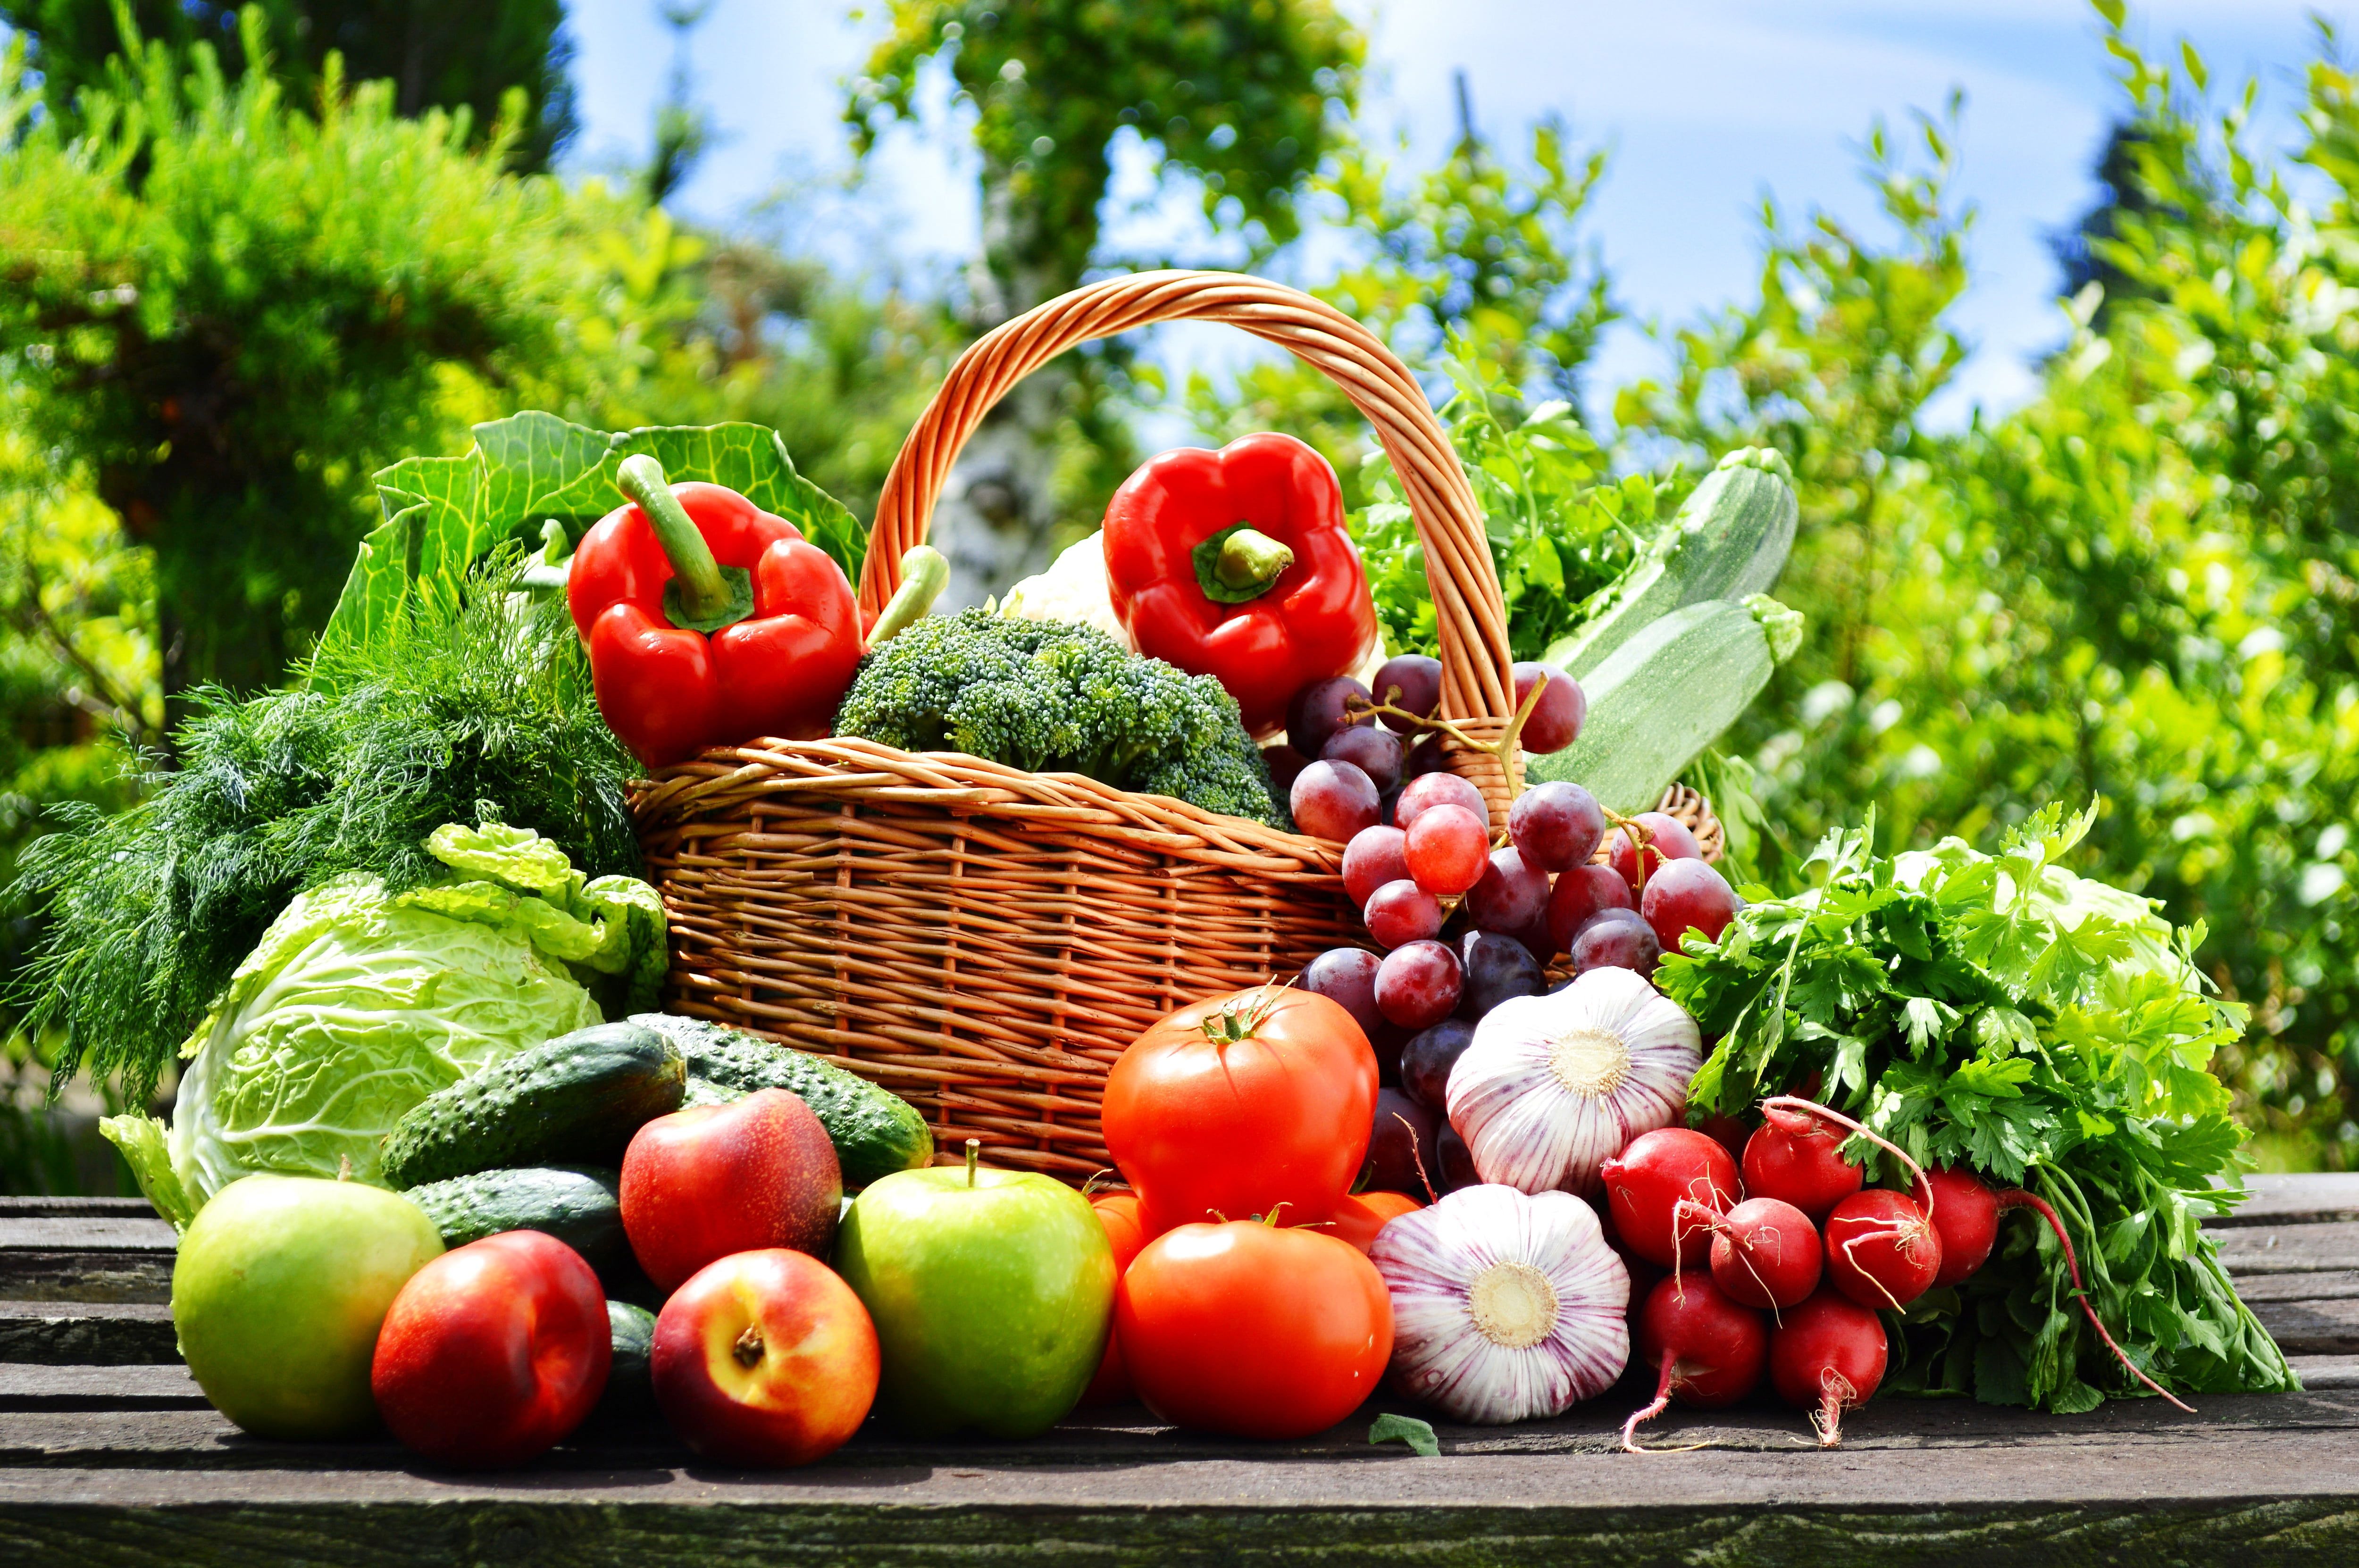 assorted fruits and vegetables #nature #basket #apples #grapes